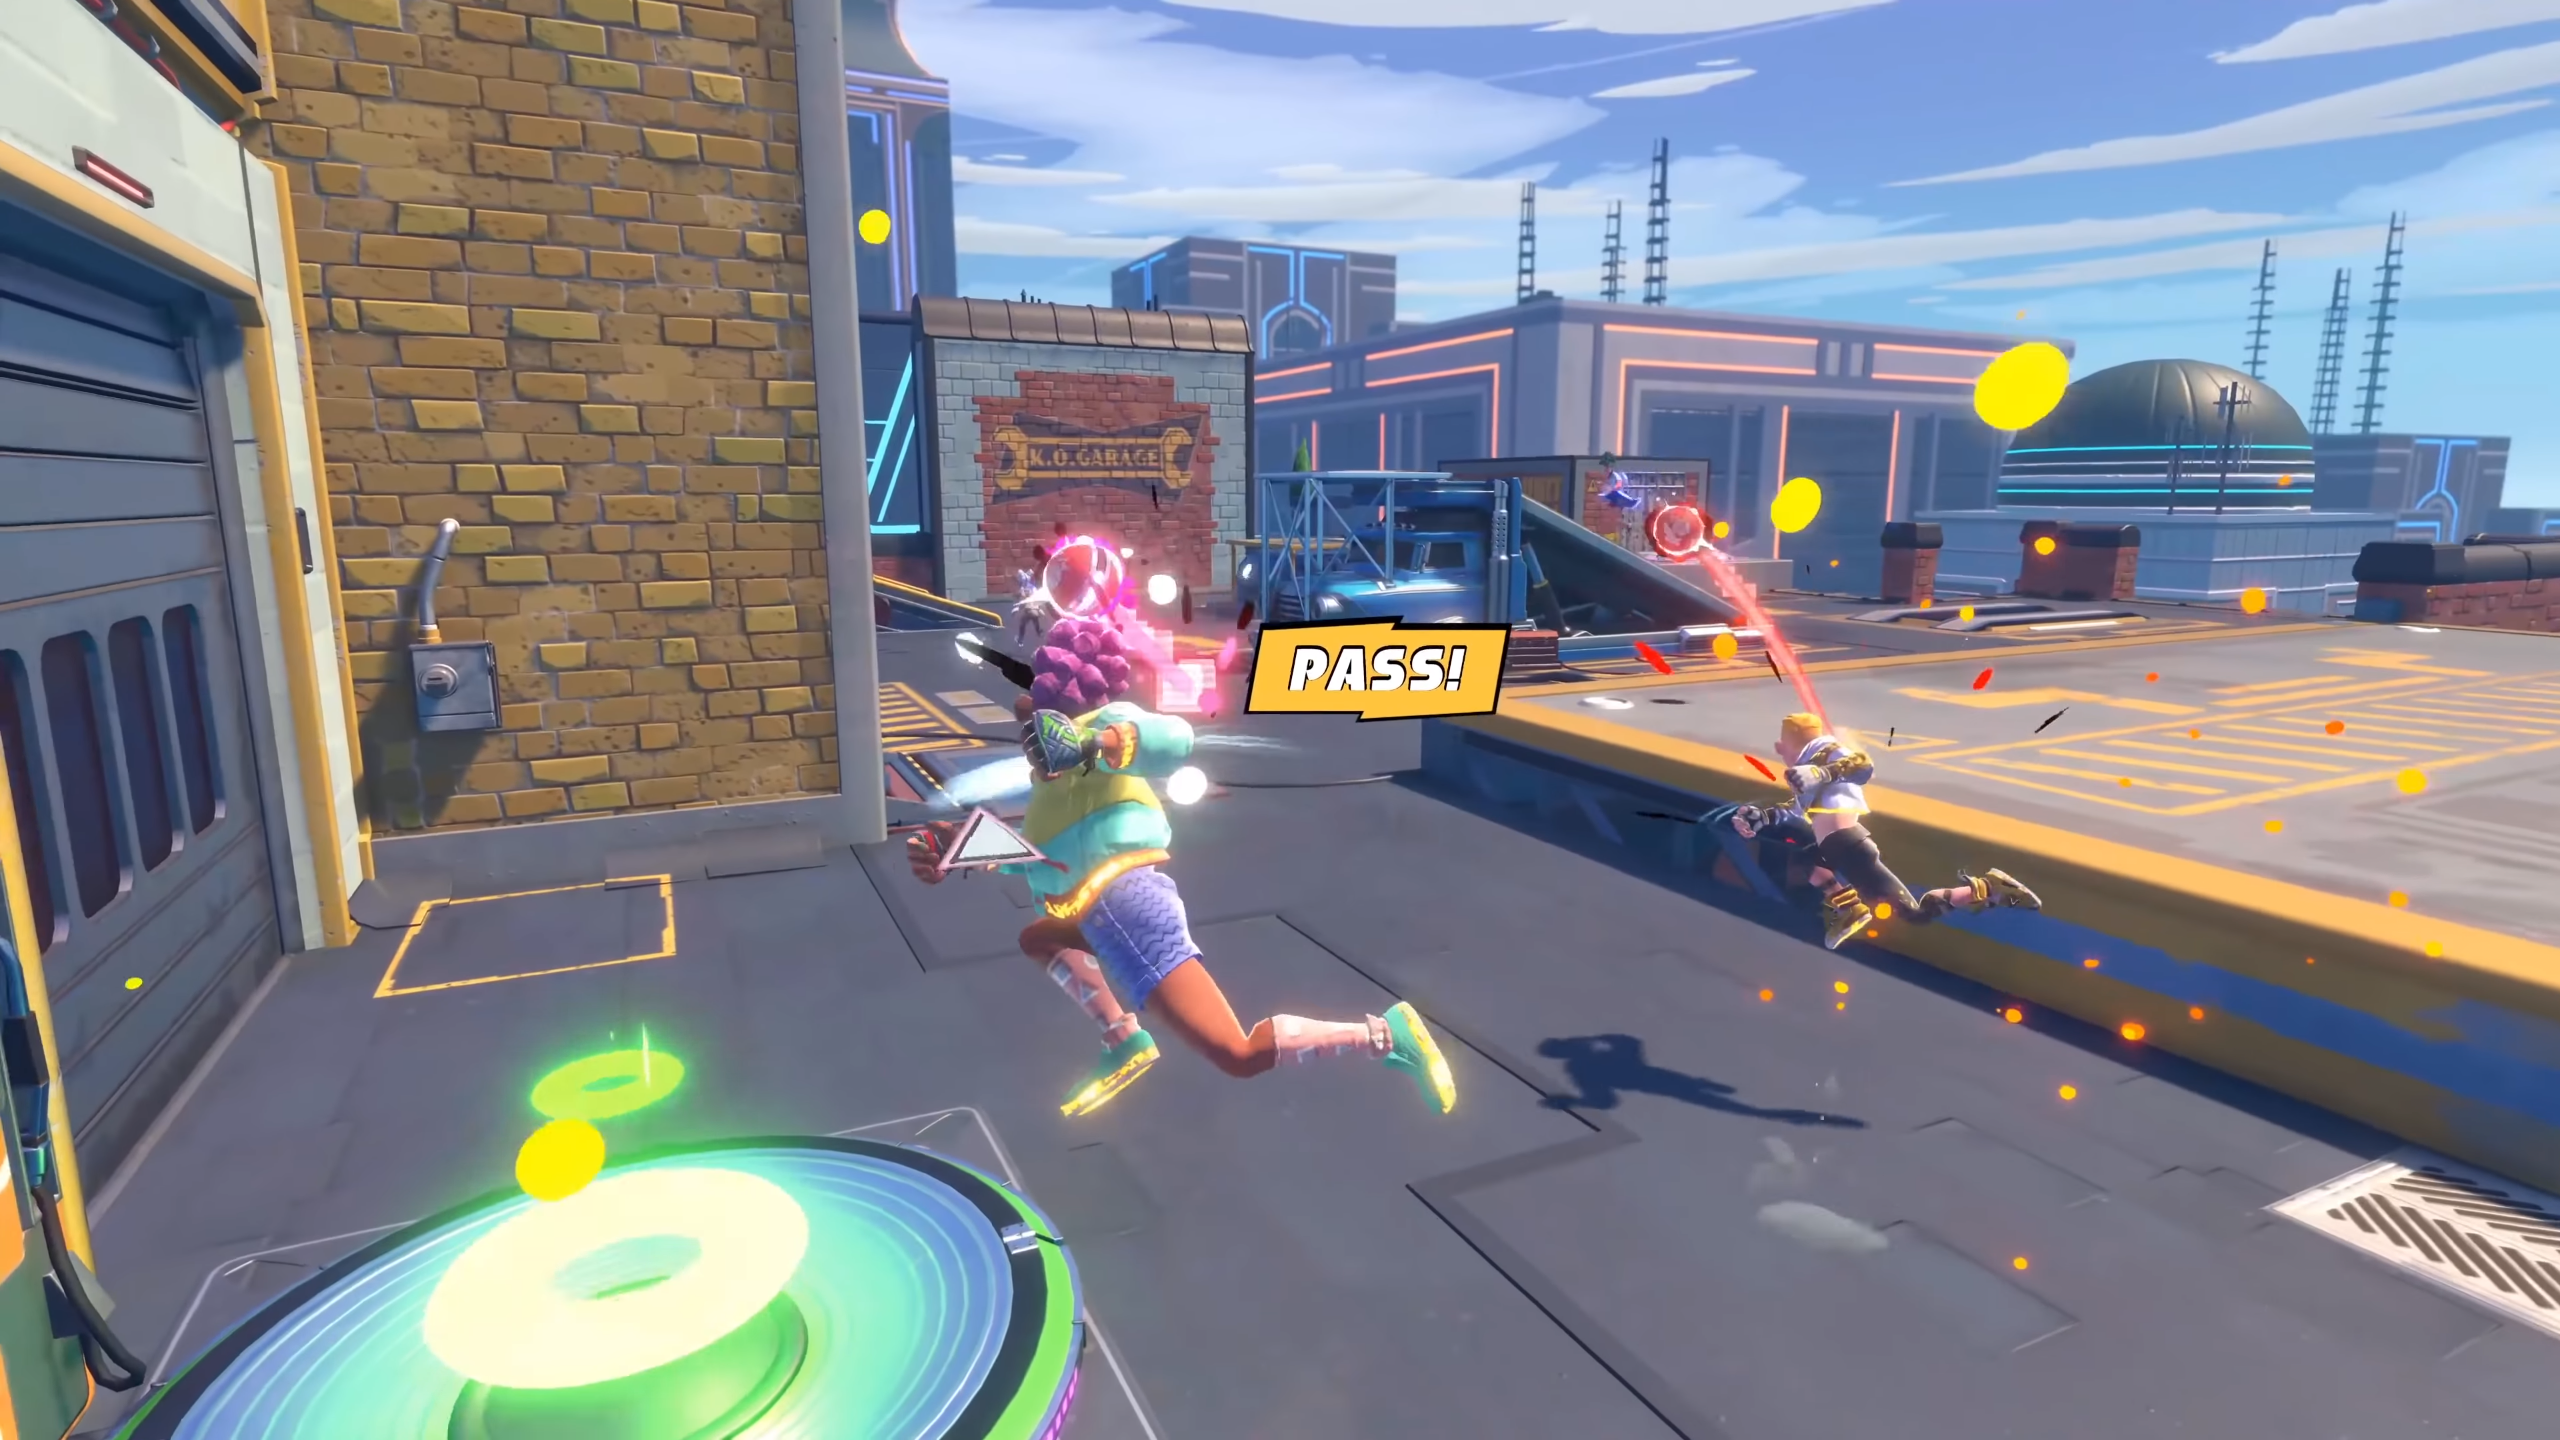 Review: Knockout City is the best team-deathmatch game we've